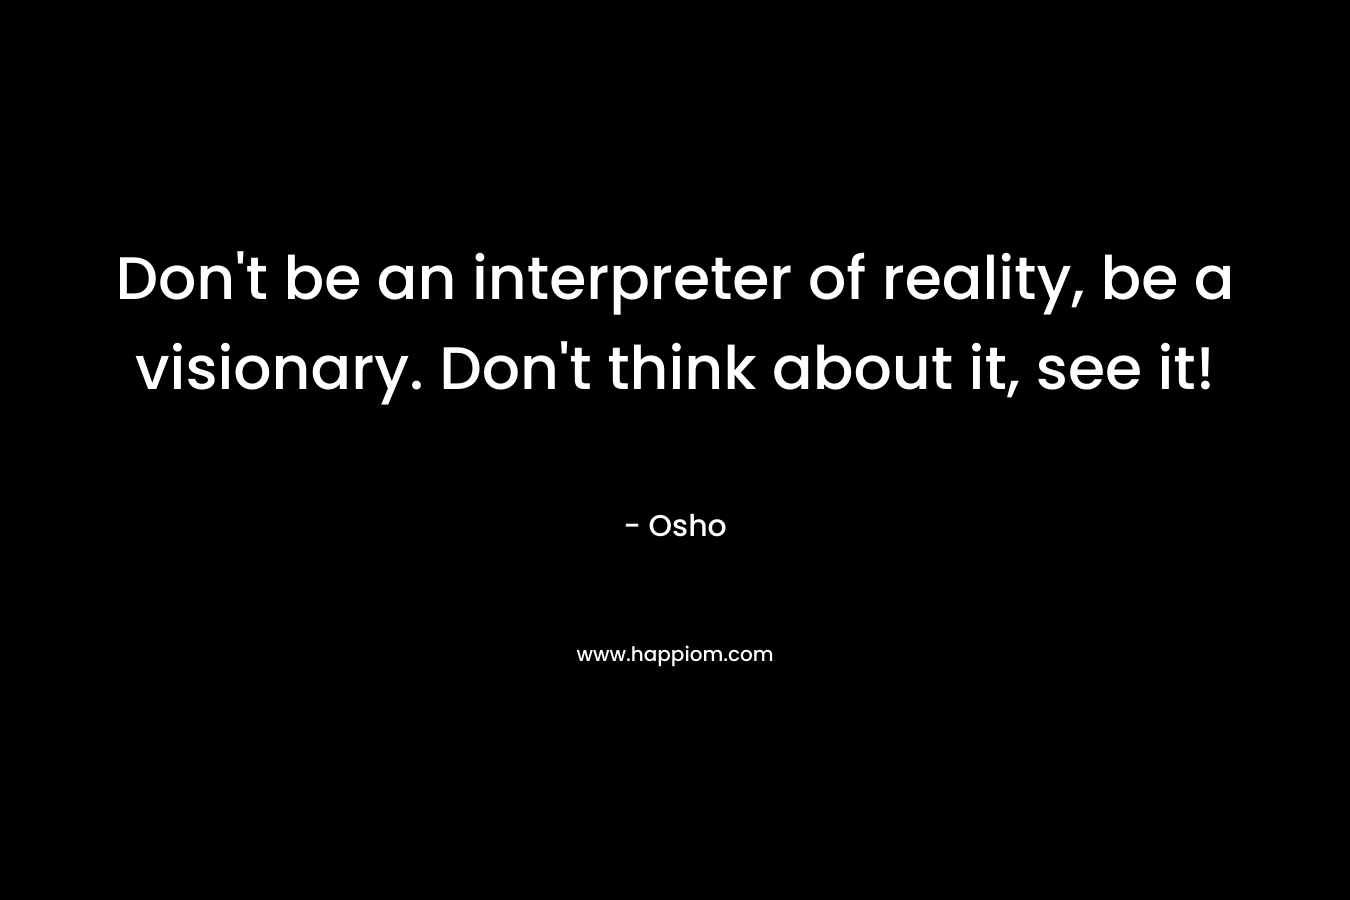 Don't be an interpreter of reality, be a visionary. Don't think about it, see it!